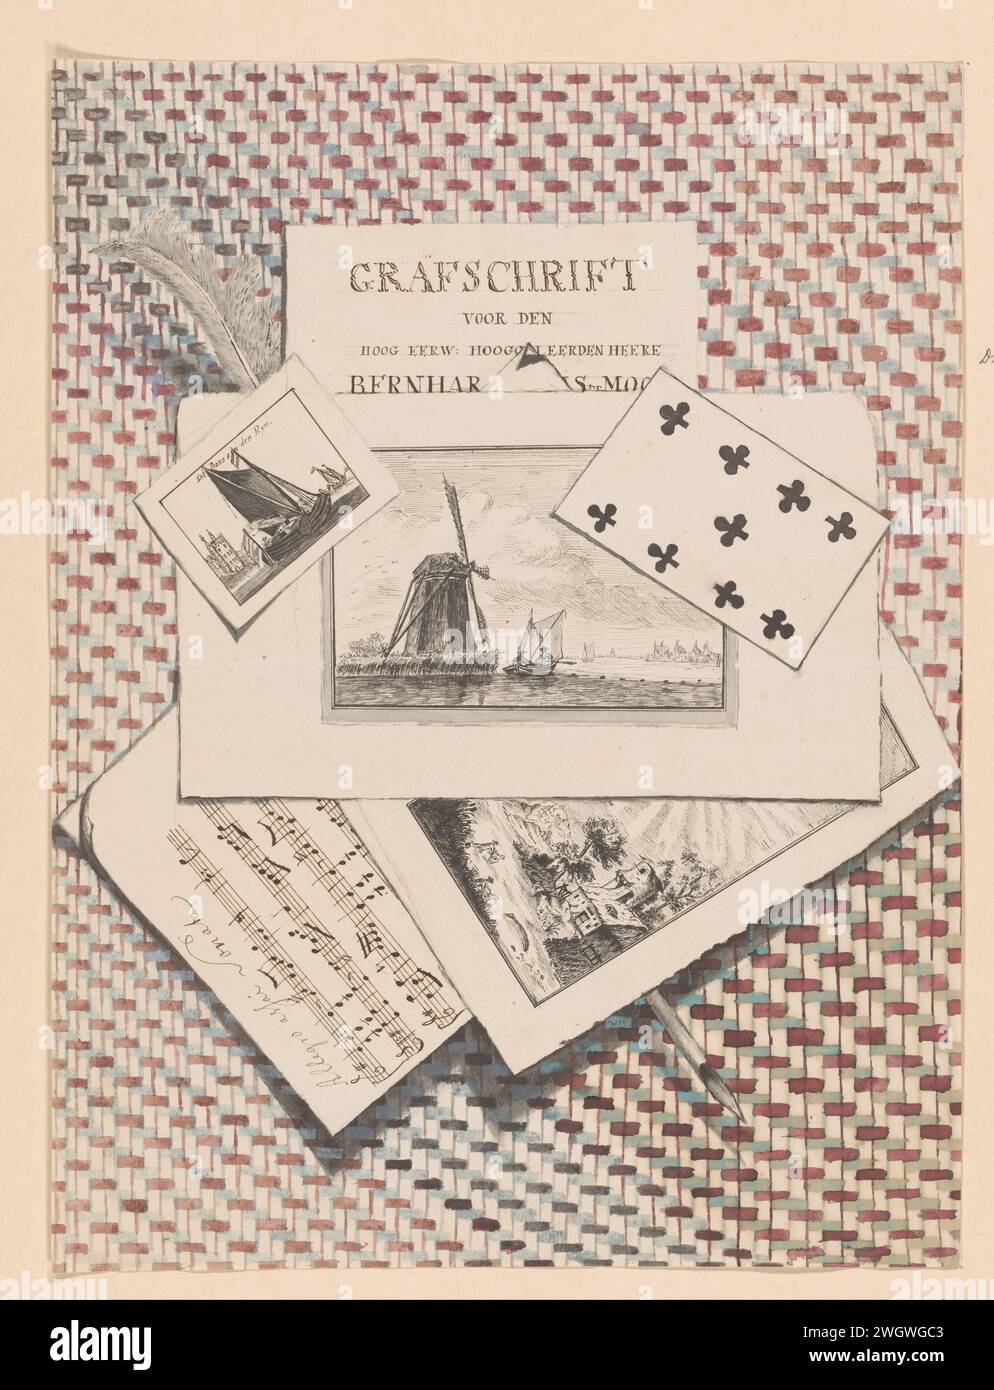 Deceiver with prints, a grave, magazine music, playing card and ferry, anonymous, in or after 1780 drawing Deceiver or trompe l'Ouil with three prints, a spring, a game card with clover, a magazine music and a burial concerning the Dutch theologian Bernhardinus de Moor, who died in 1780.  paper. ink. watercolor (paint). pencil pen / brush 'trompe l'oeil'. print, e.g.: engraving, etching, lithograph. printed edition of musical score. playing-cards Stock Photo